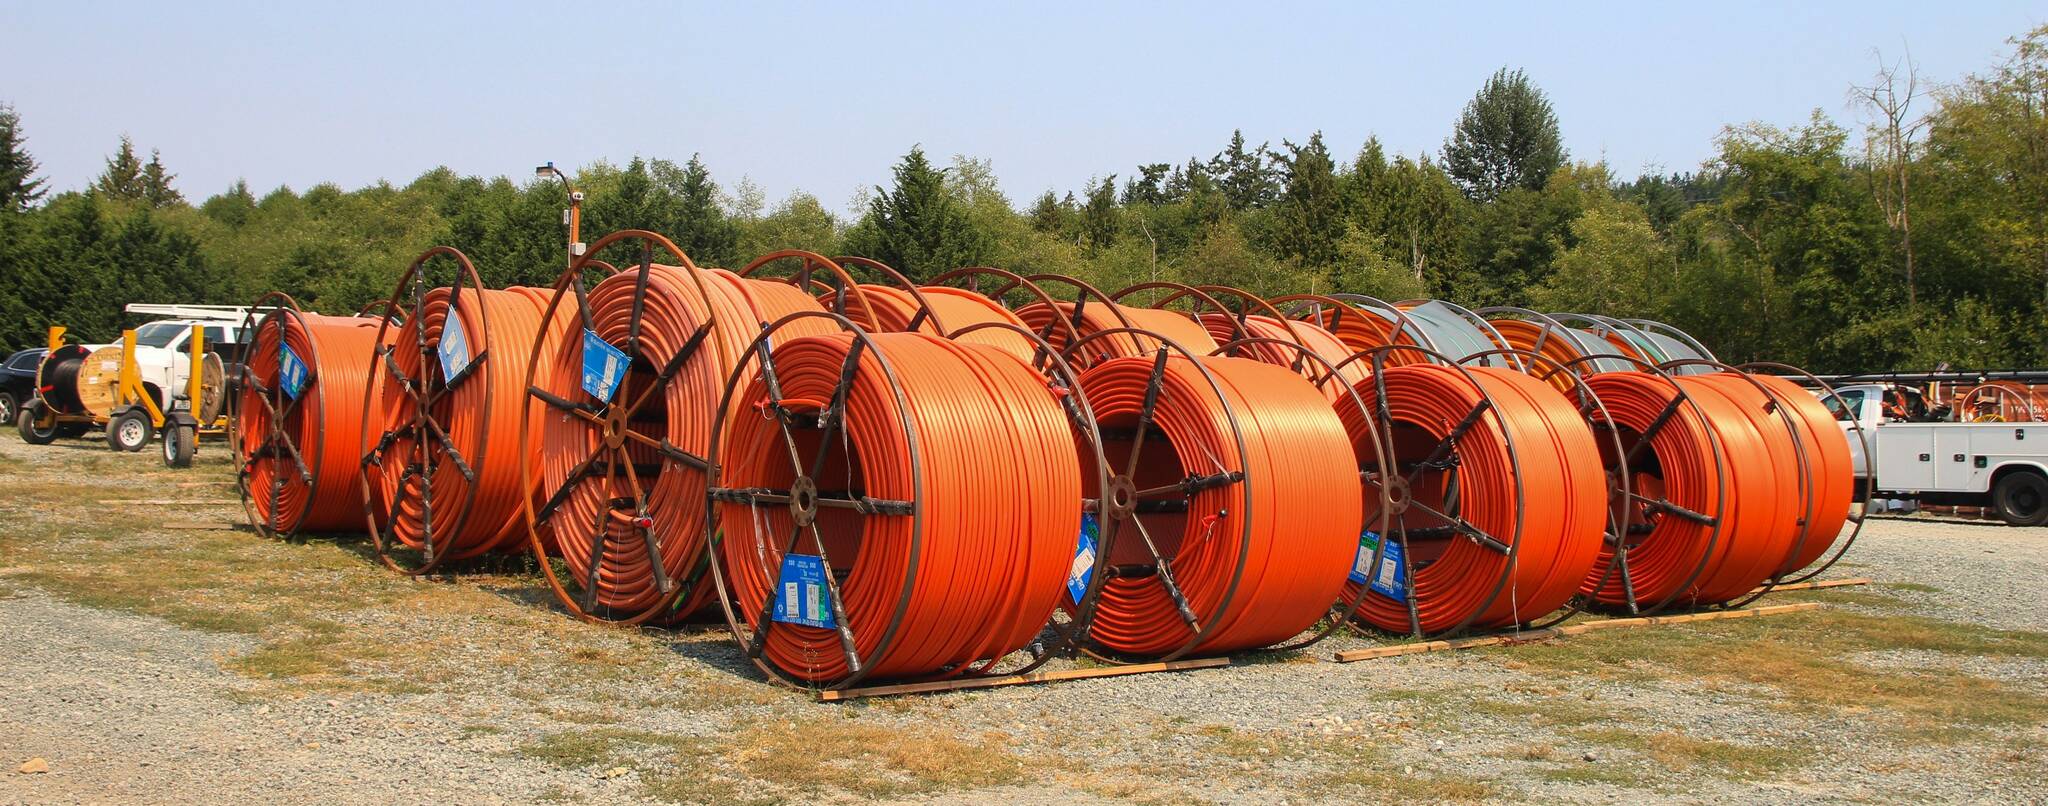 These orange rolled pipes, located at the Whidbey Telecom construction staging area in Langley, are conduits containing smaller tubes through which the fibers are pulled. They will be buried underground, on land. (Photo by Luisa Loi/Whidbey News-Times)